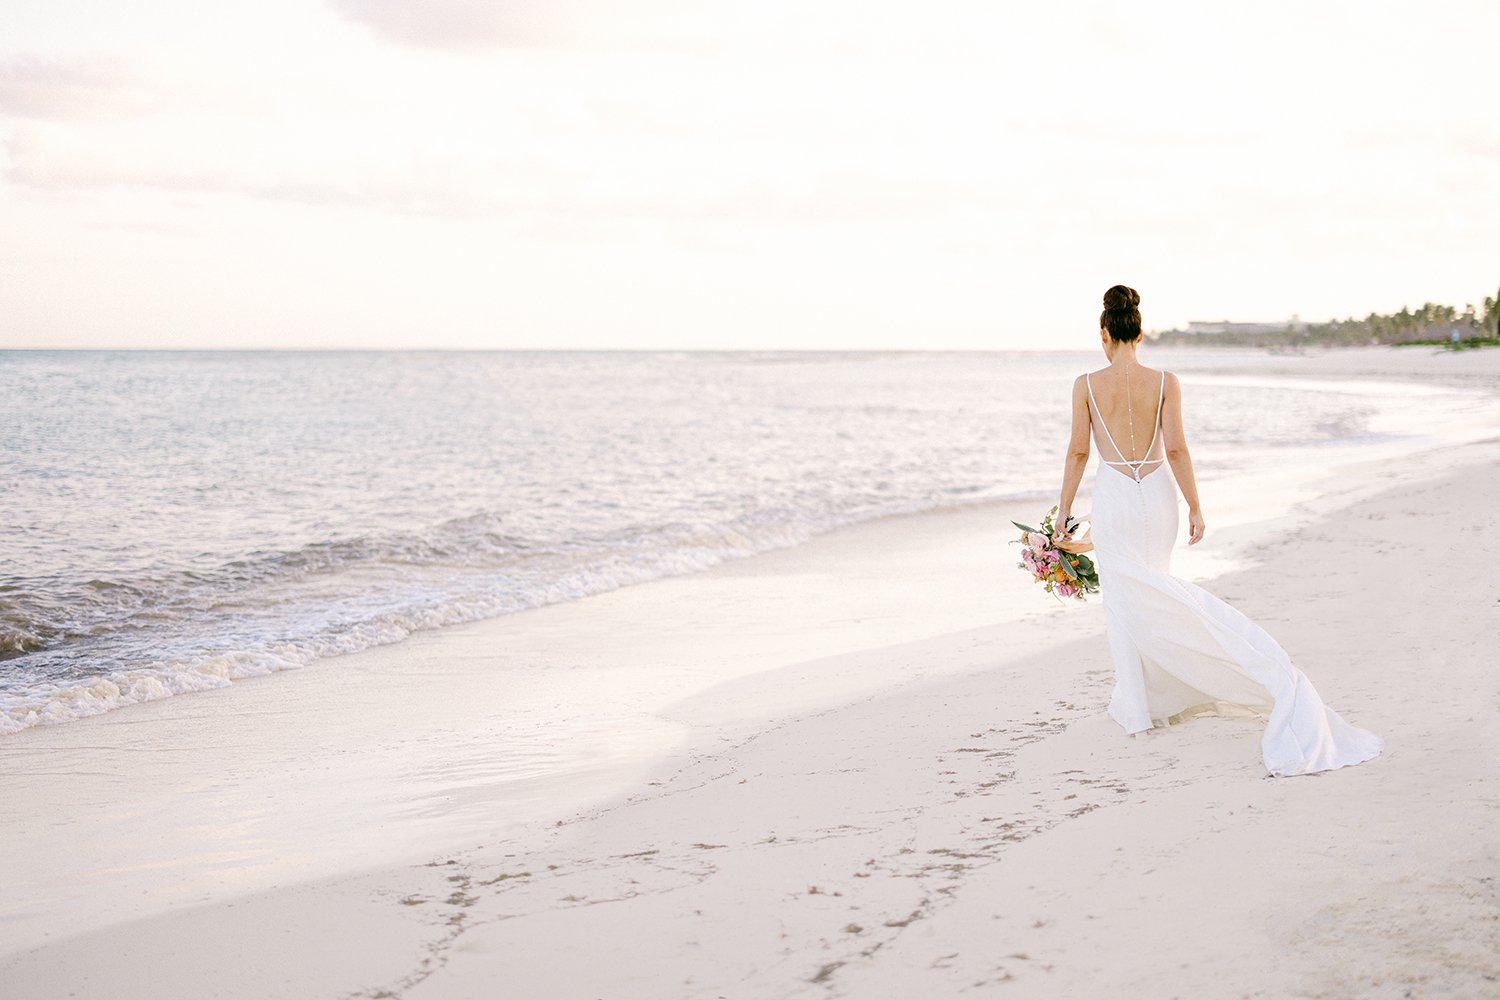 35 wonderful landscape photography of bride walking on the beach wearing her white wedding dress and holdin bouquet of flowers at Rosewood Mayakoba Riviera Maya Cancun Mexico.JPG